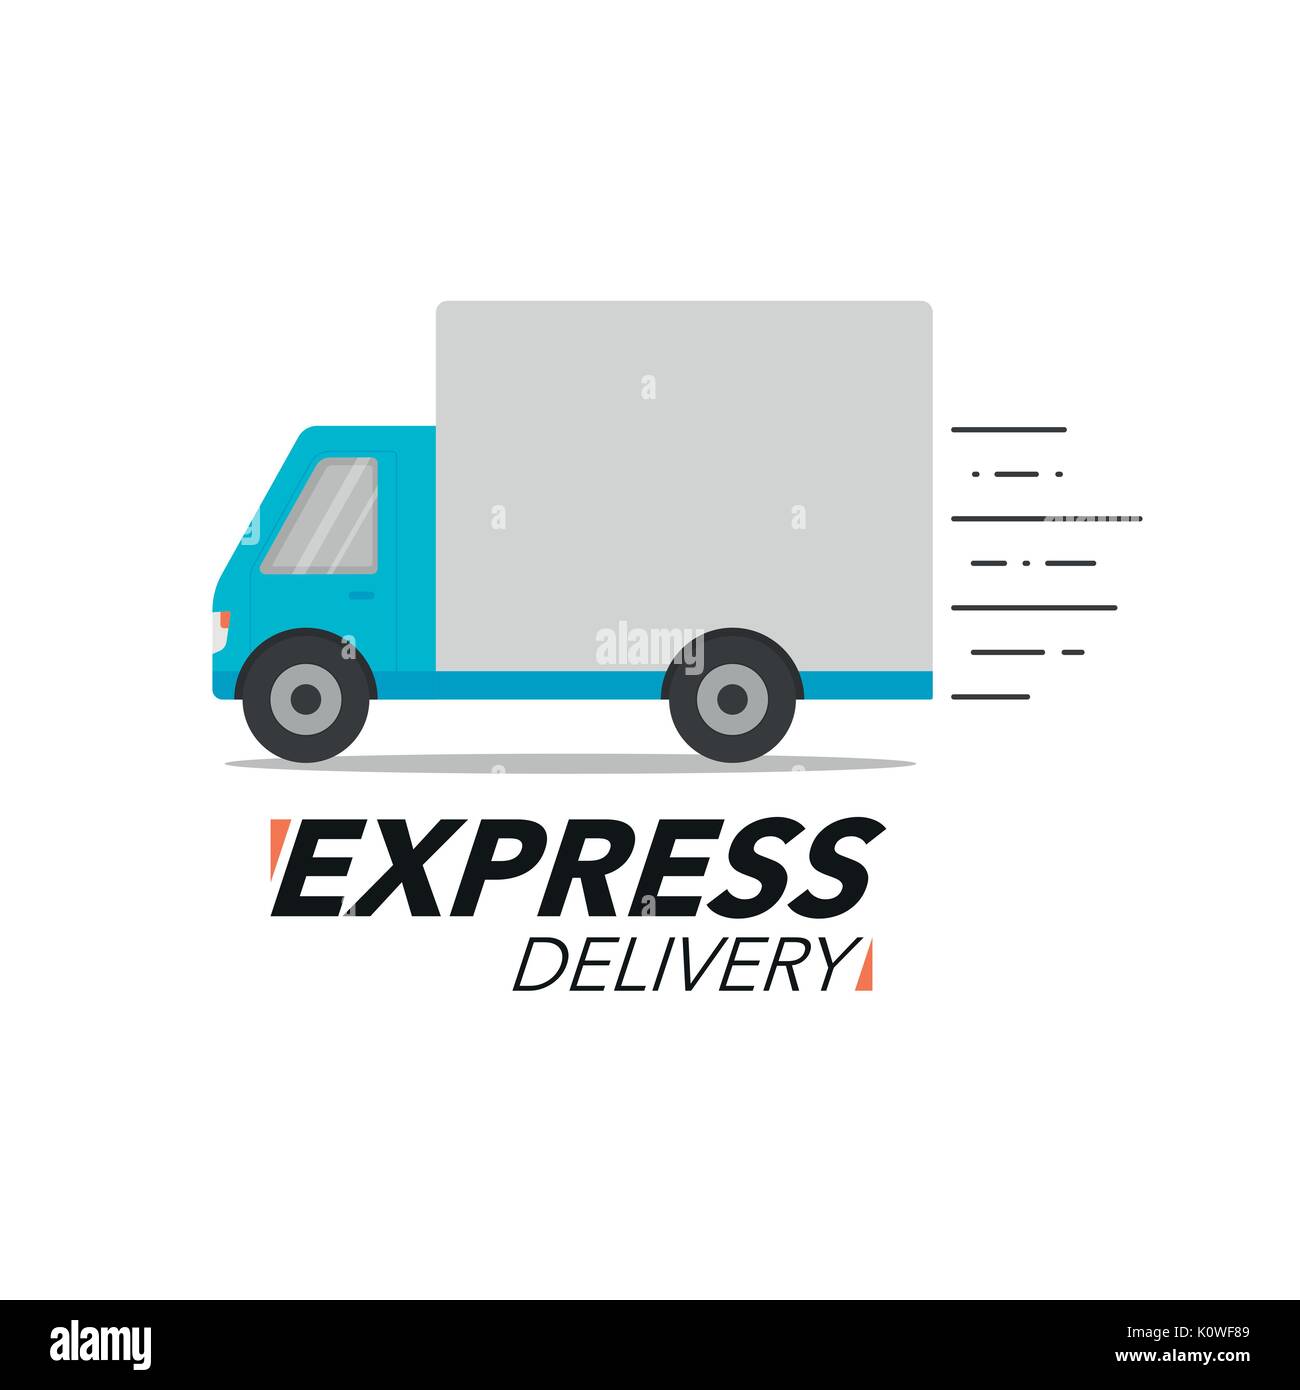 https://c8.alamy.com/comp/K0WF89/express-delivery-icon-concept-truck-service-order-worldwide-shipping-K0WF89.jpg